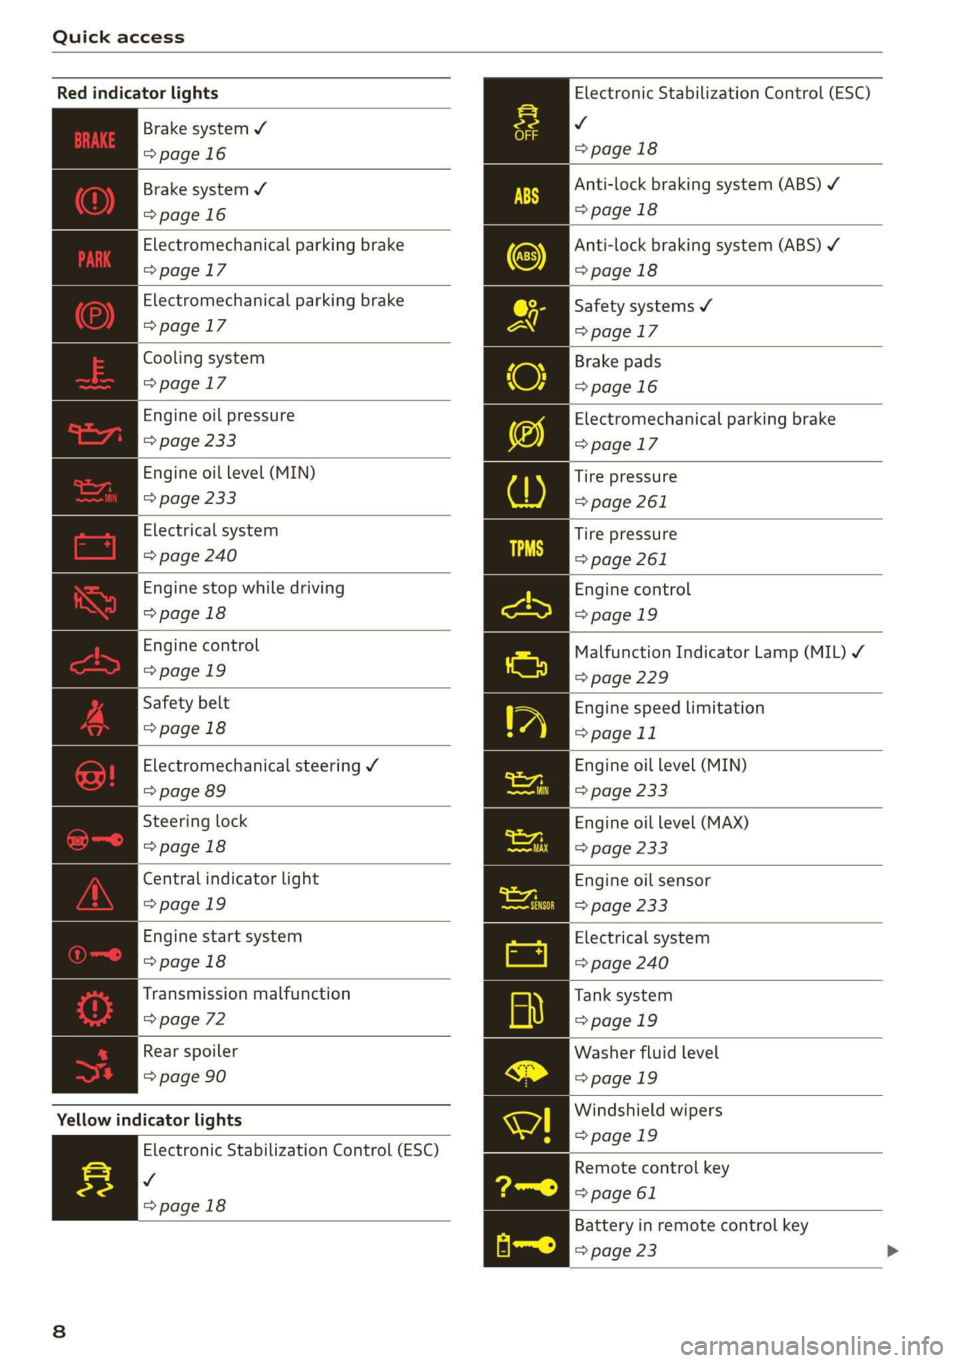 AUDI R8 COUPE 2020  Owners Manual Quick access 
  
  
Electronic Stabilization Control (ESC) 
v 
=>page 18 
Red indicator lights 
    
  
         
   
   
Brake system ¥ 
=>page 16 
    
   
       Anti-lock braking system (ABS) ¥ 